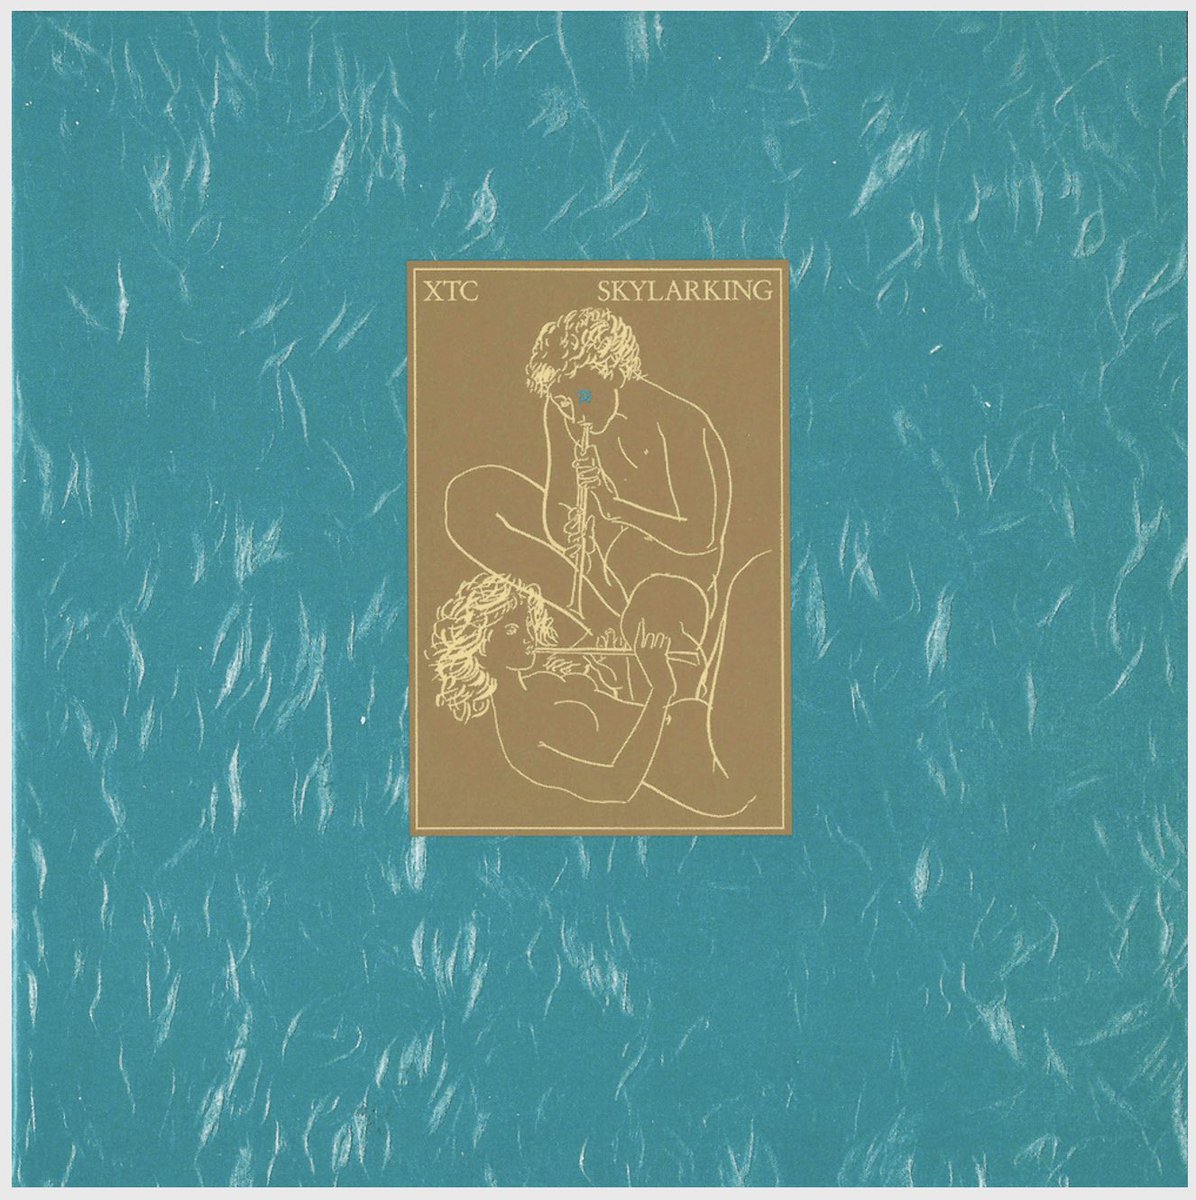 #LifeInSongs
Sept 29
Sick / Ill
Dying by XTC
“When they carried you out your mouth was open wide
The cat went astray and the dog did pine for days and days
And I felt so guilty when we played you up
When you were ill, so ill”
youtu.be/vd3BIb3rYXg?t=1